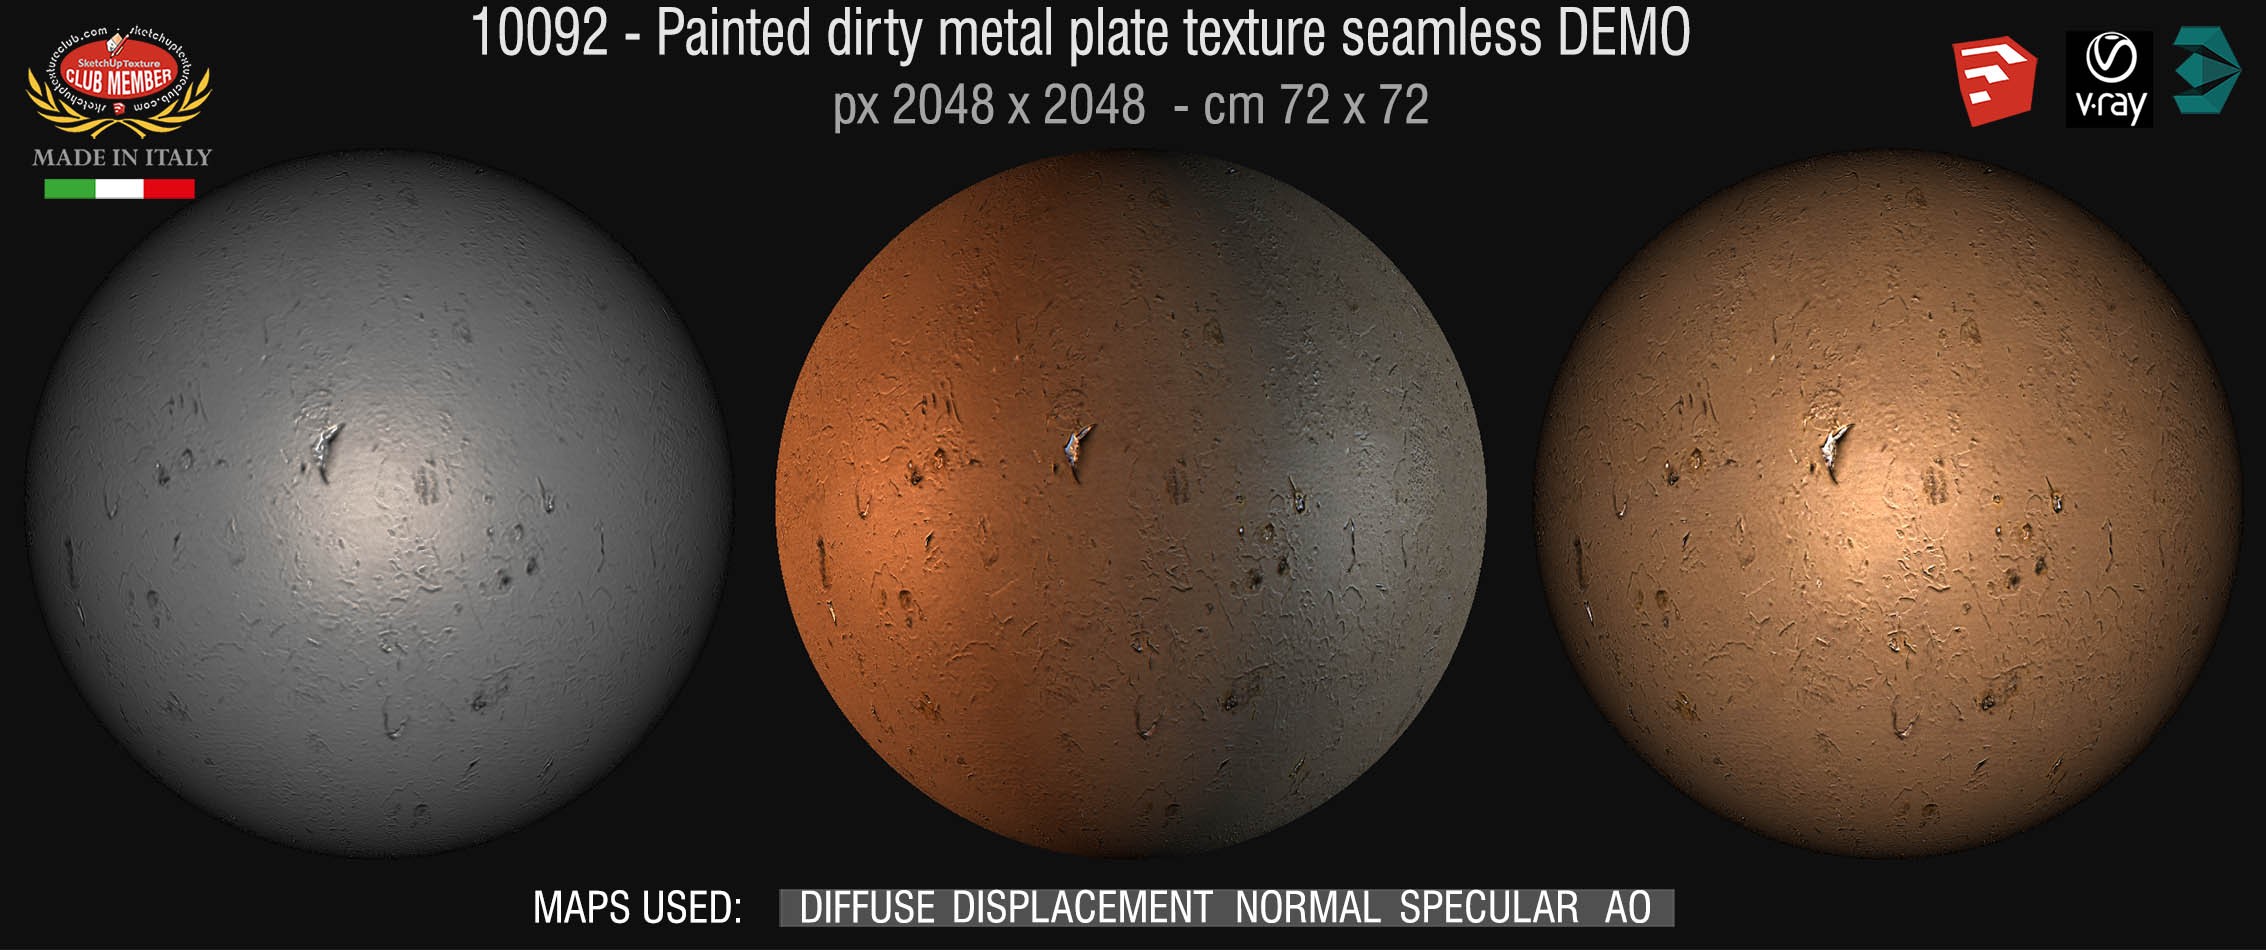 100092 Painted dirty metal texture seamless + maps DEMO